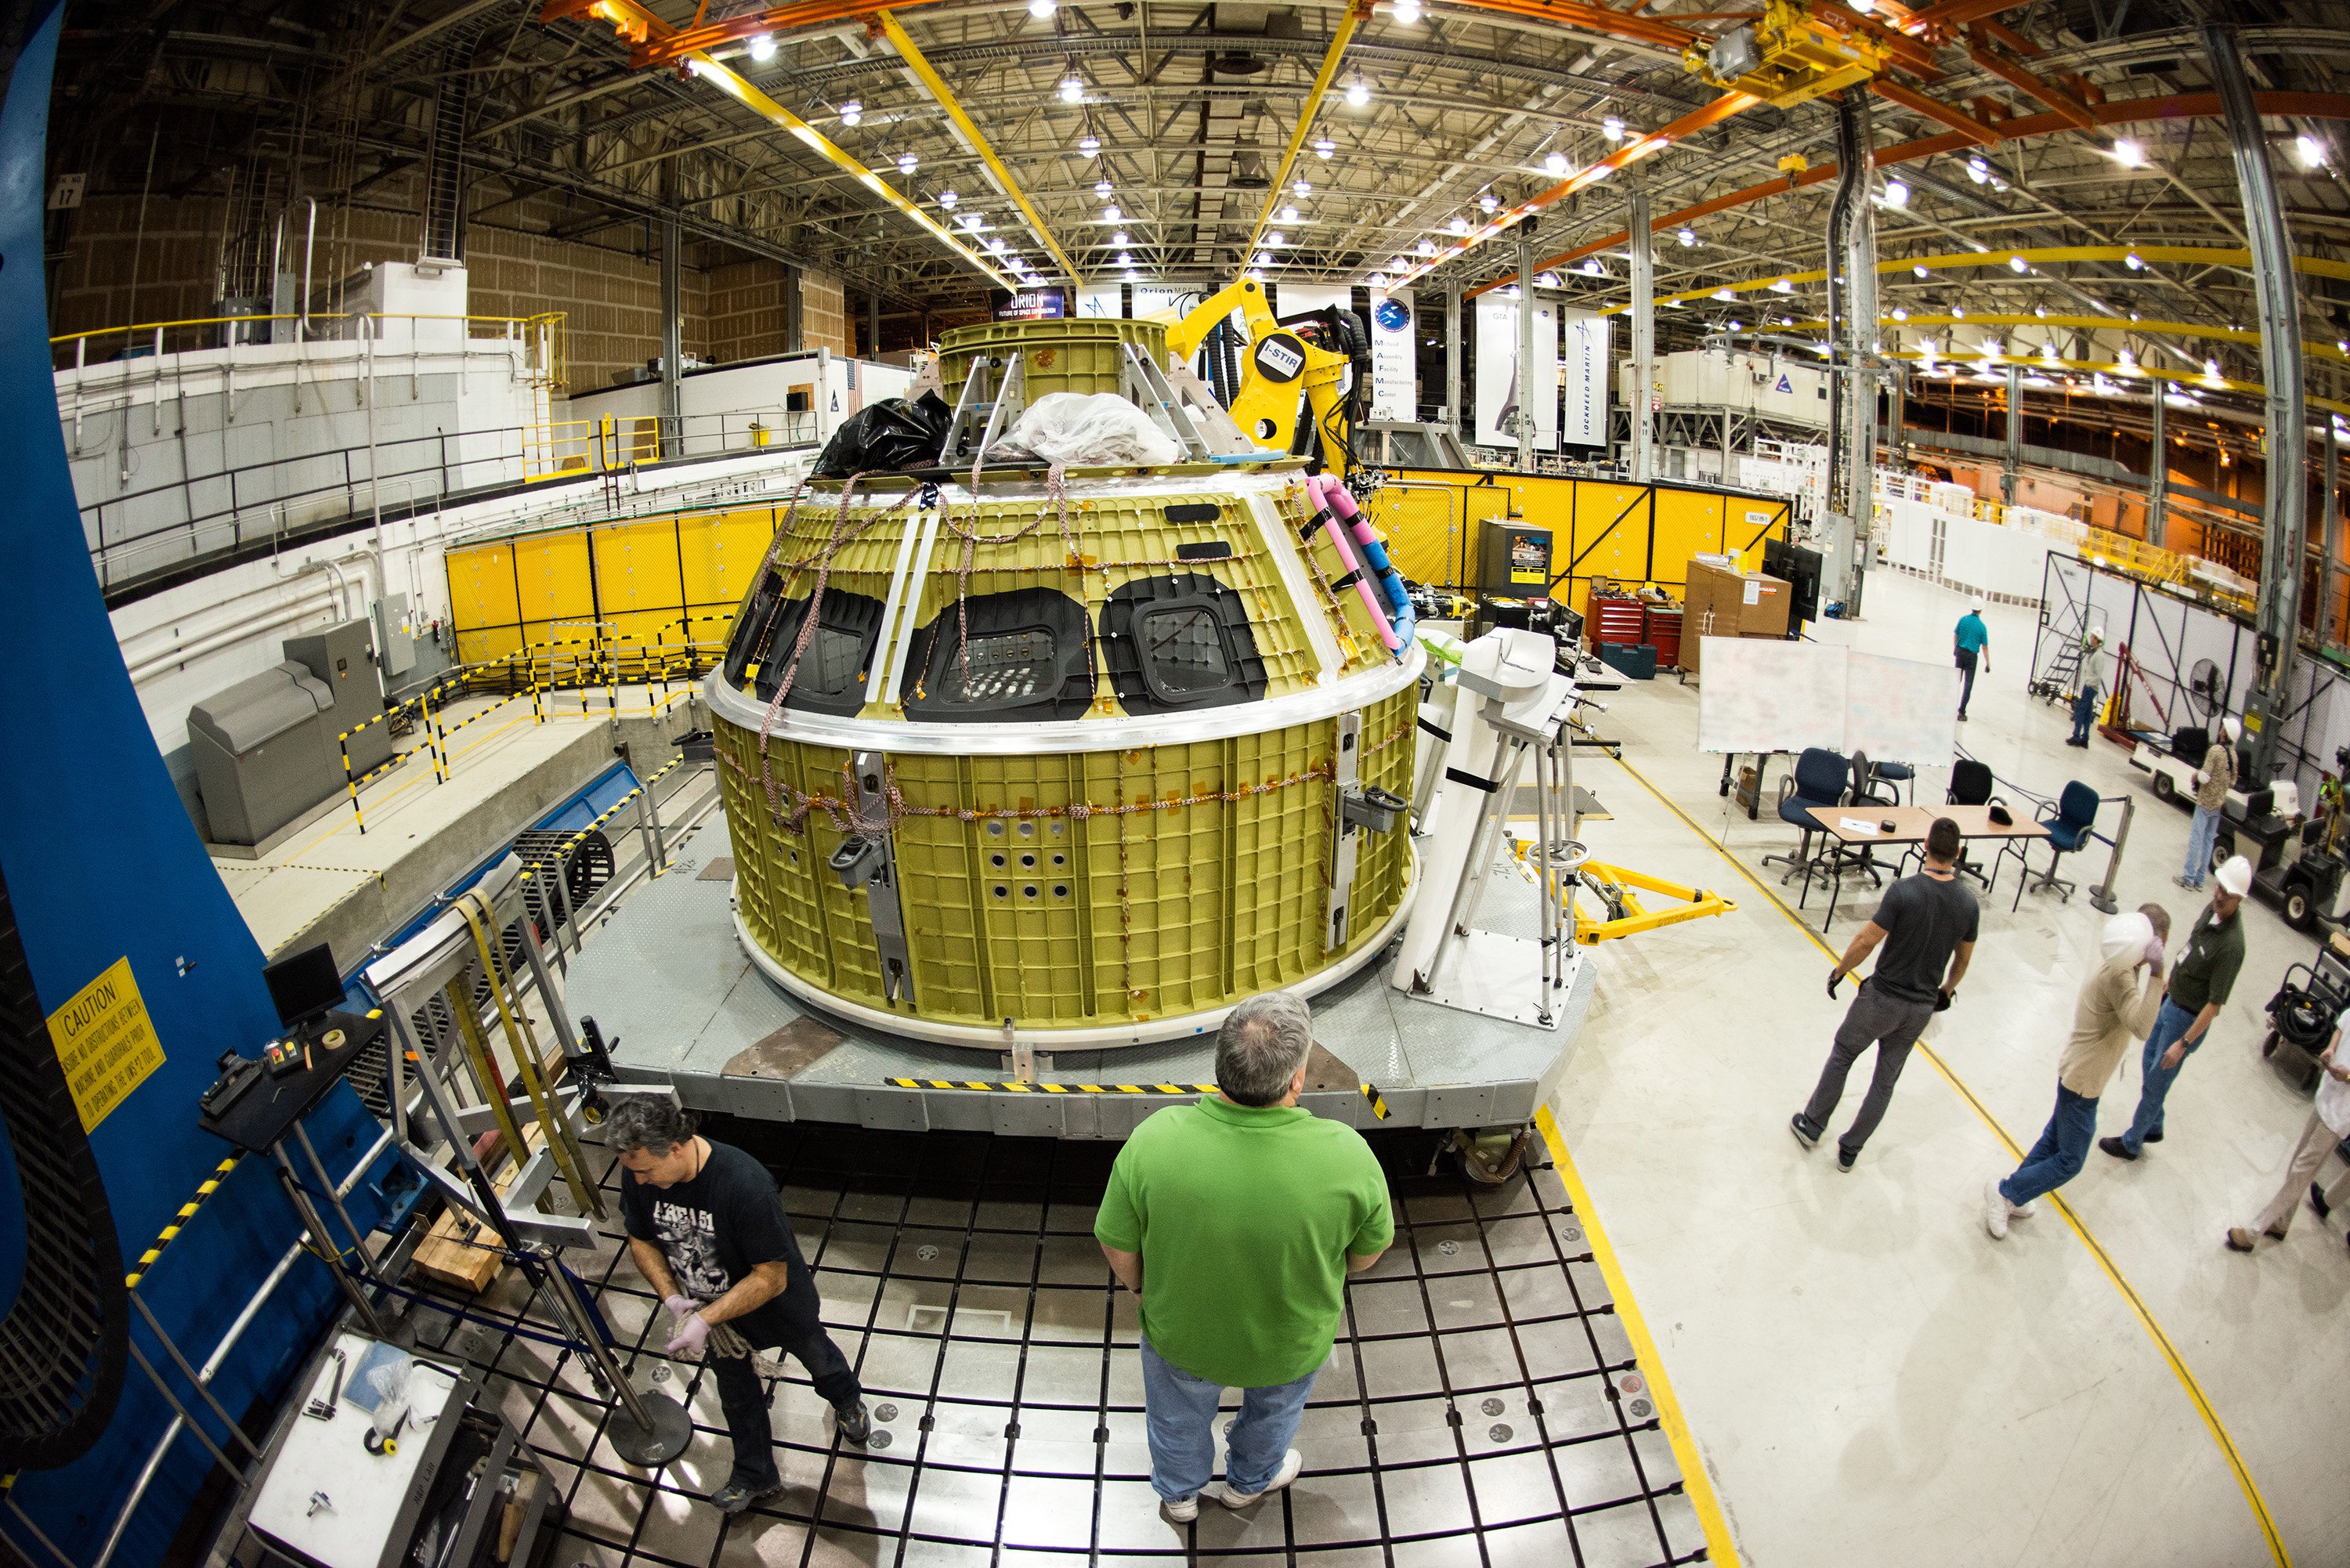 Orion being put together as next signature American spacecraft